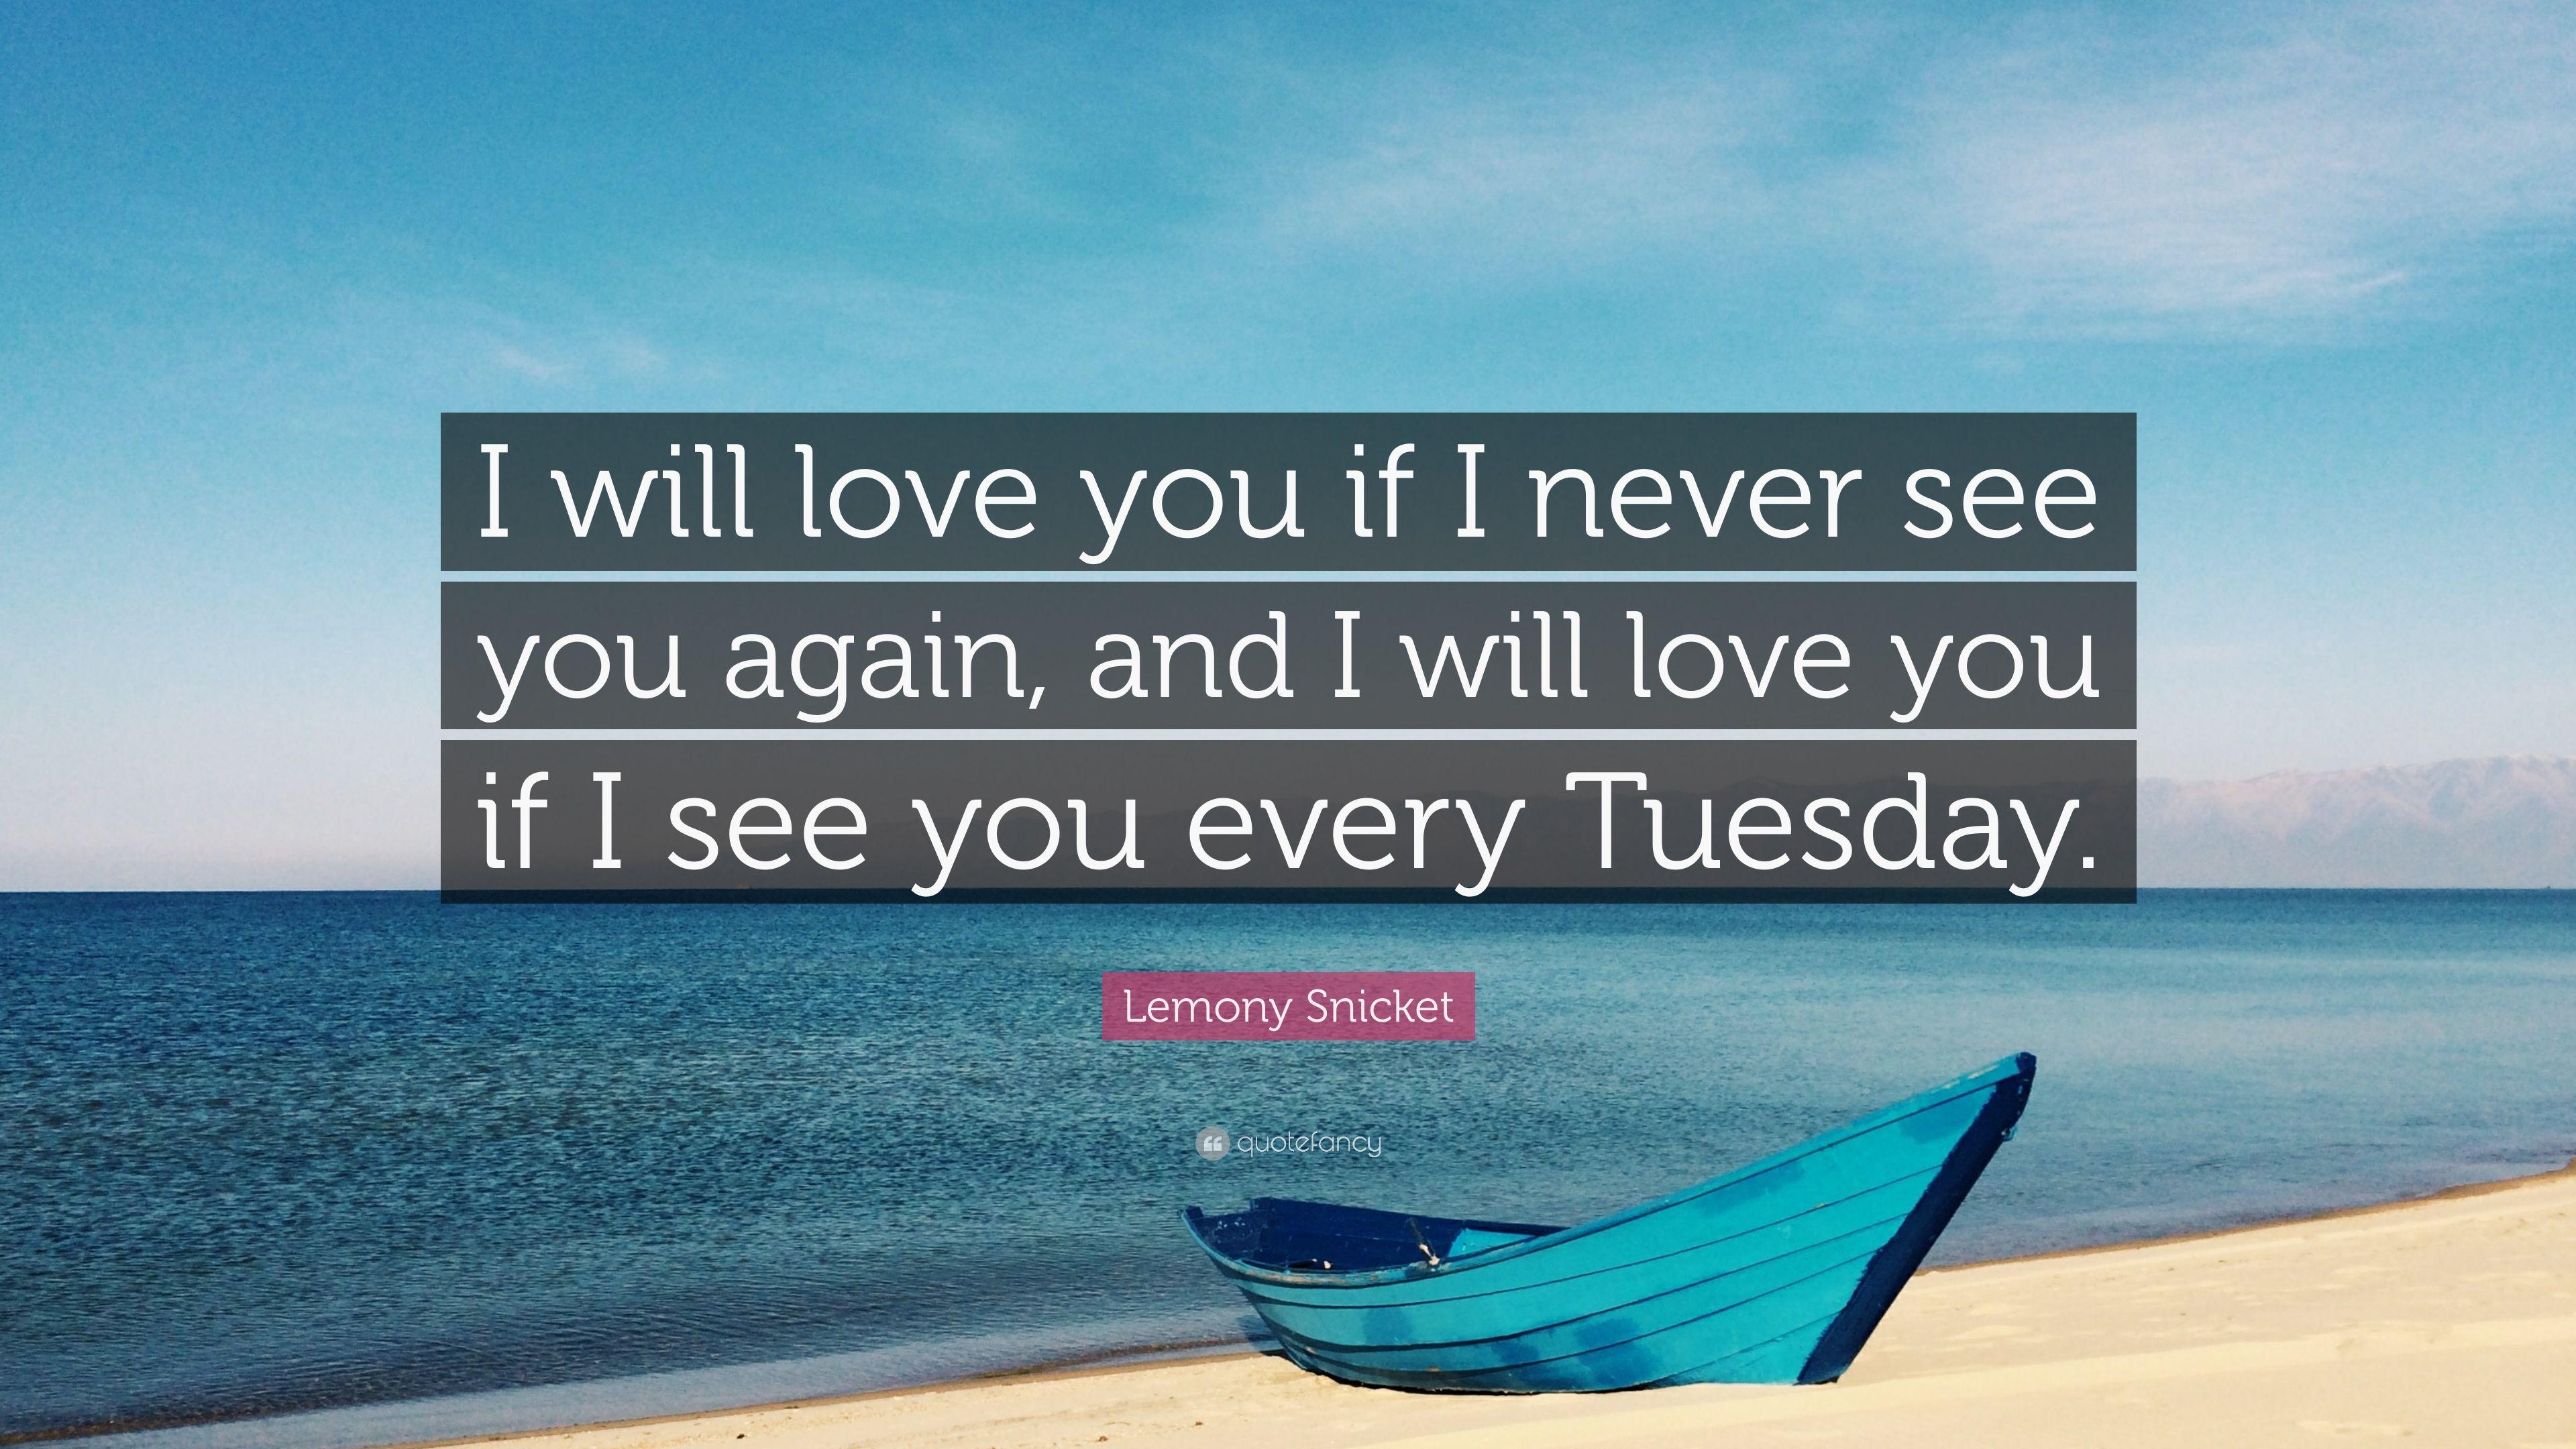 Lemony Snicket Quote: “I will love you if I never see you again